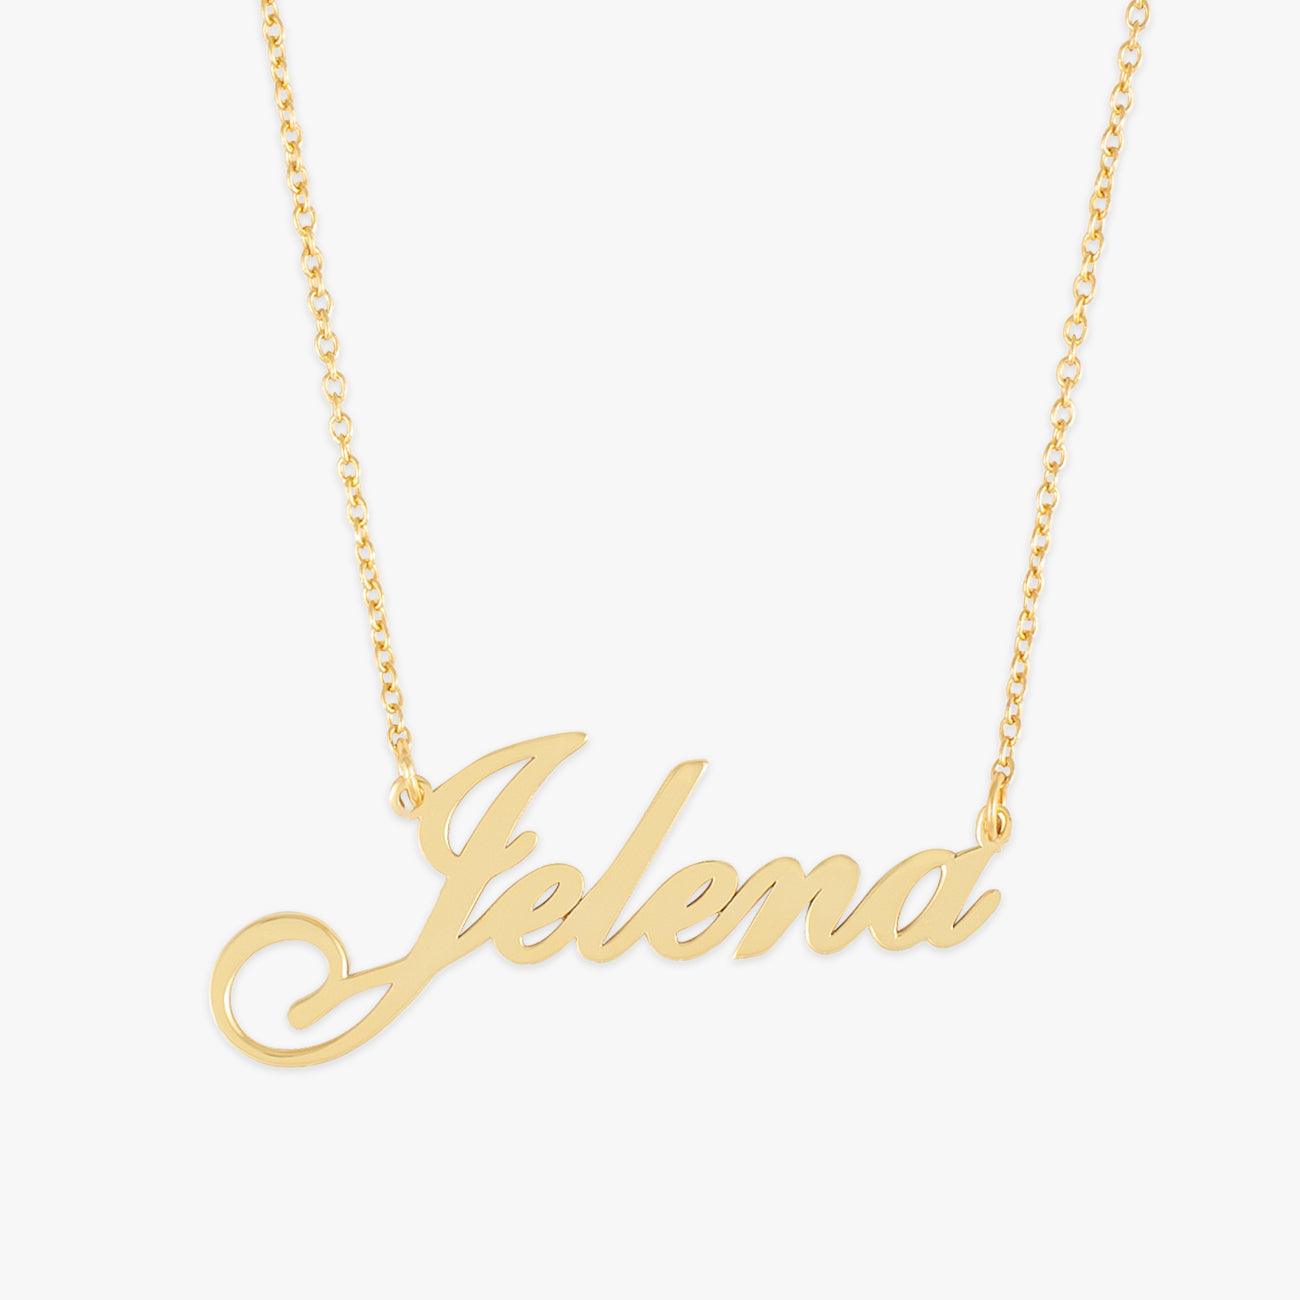 herzschmuck Name Necklaces Classic Name Necklace